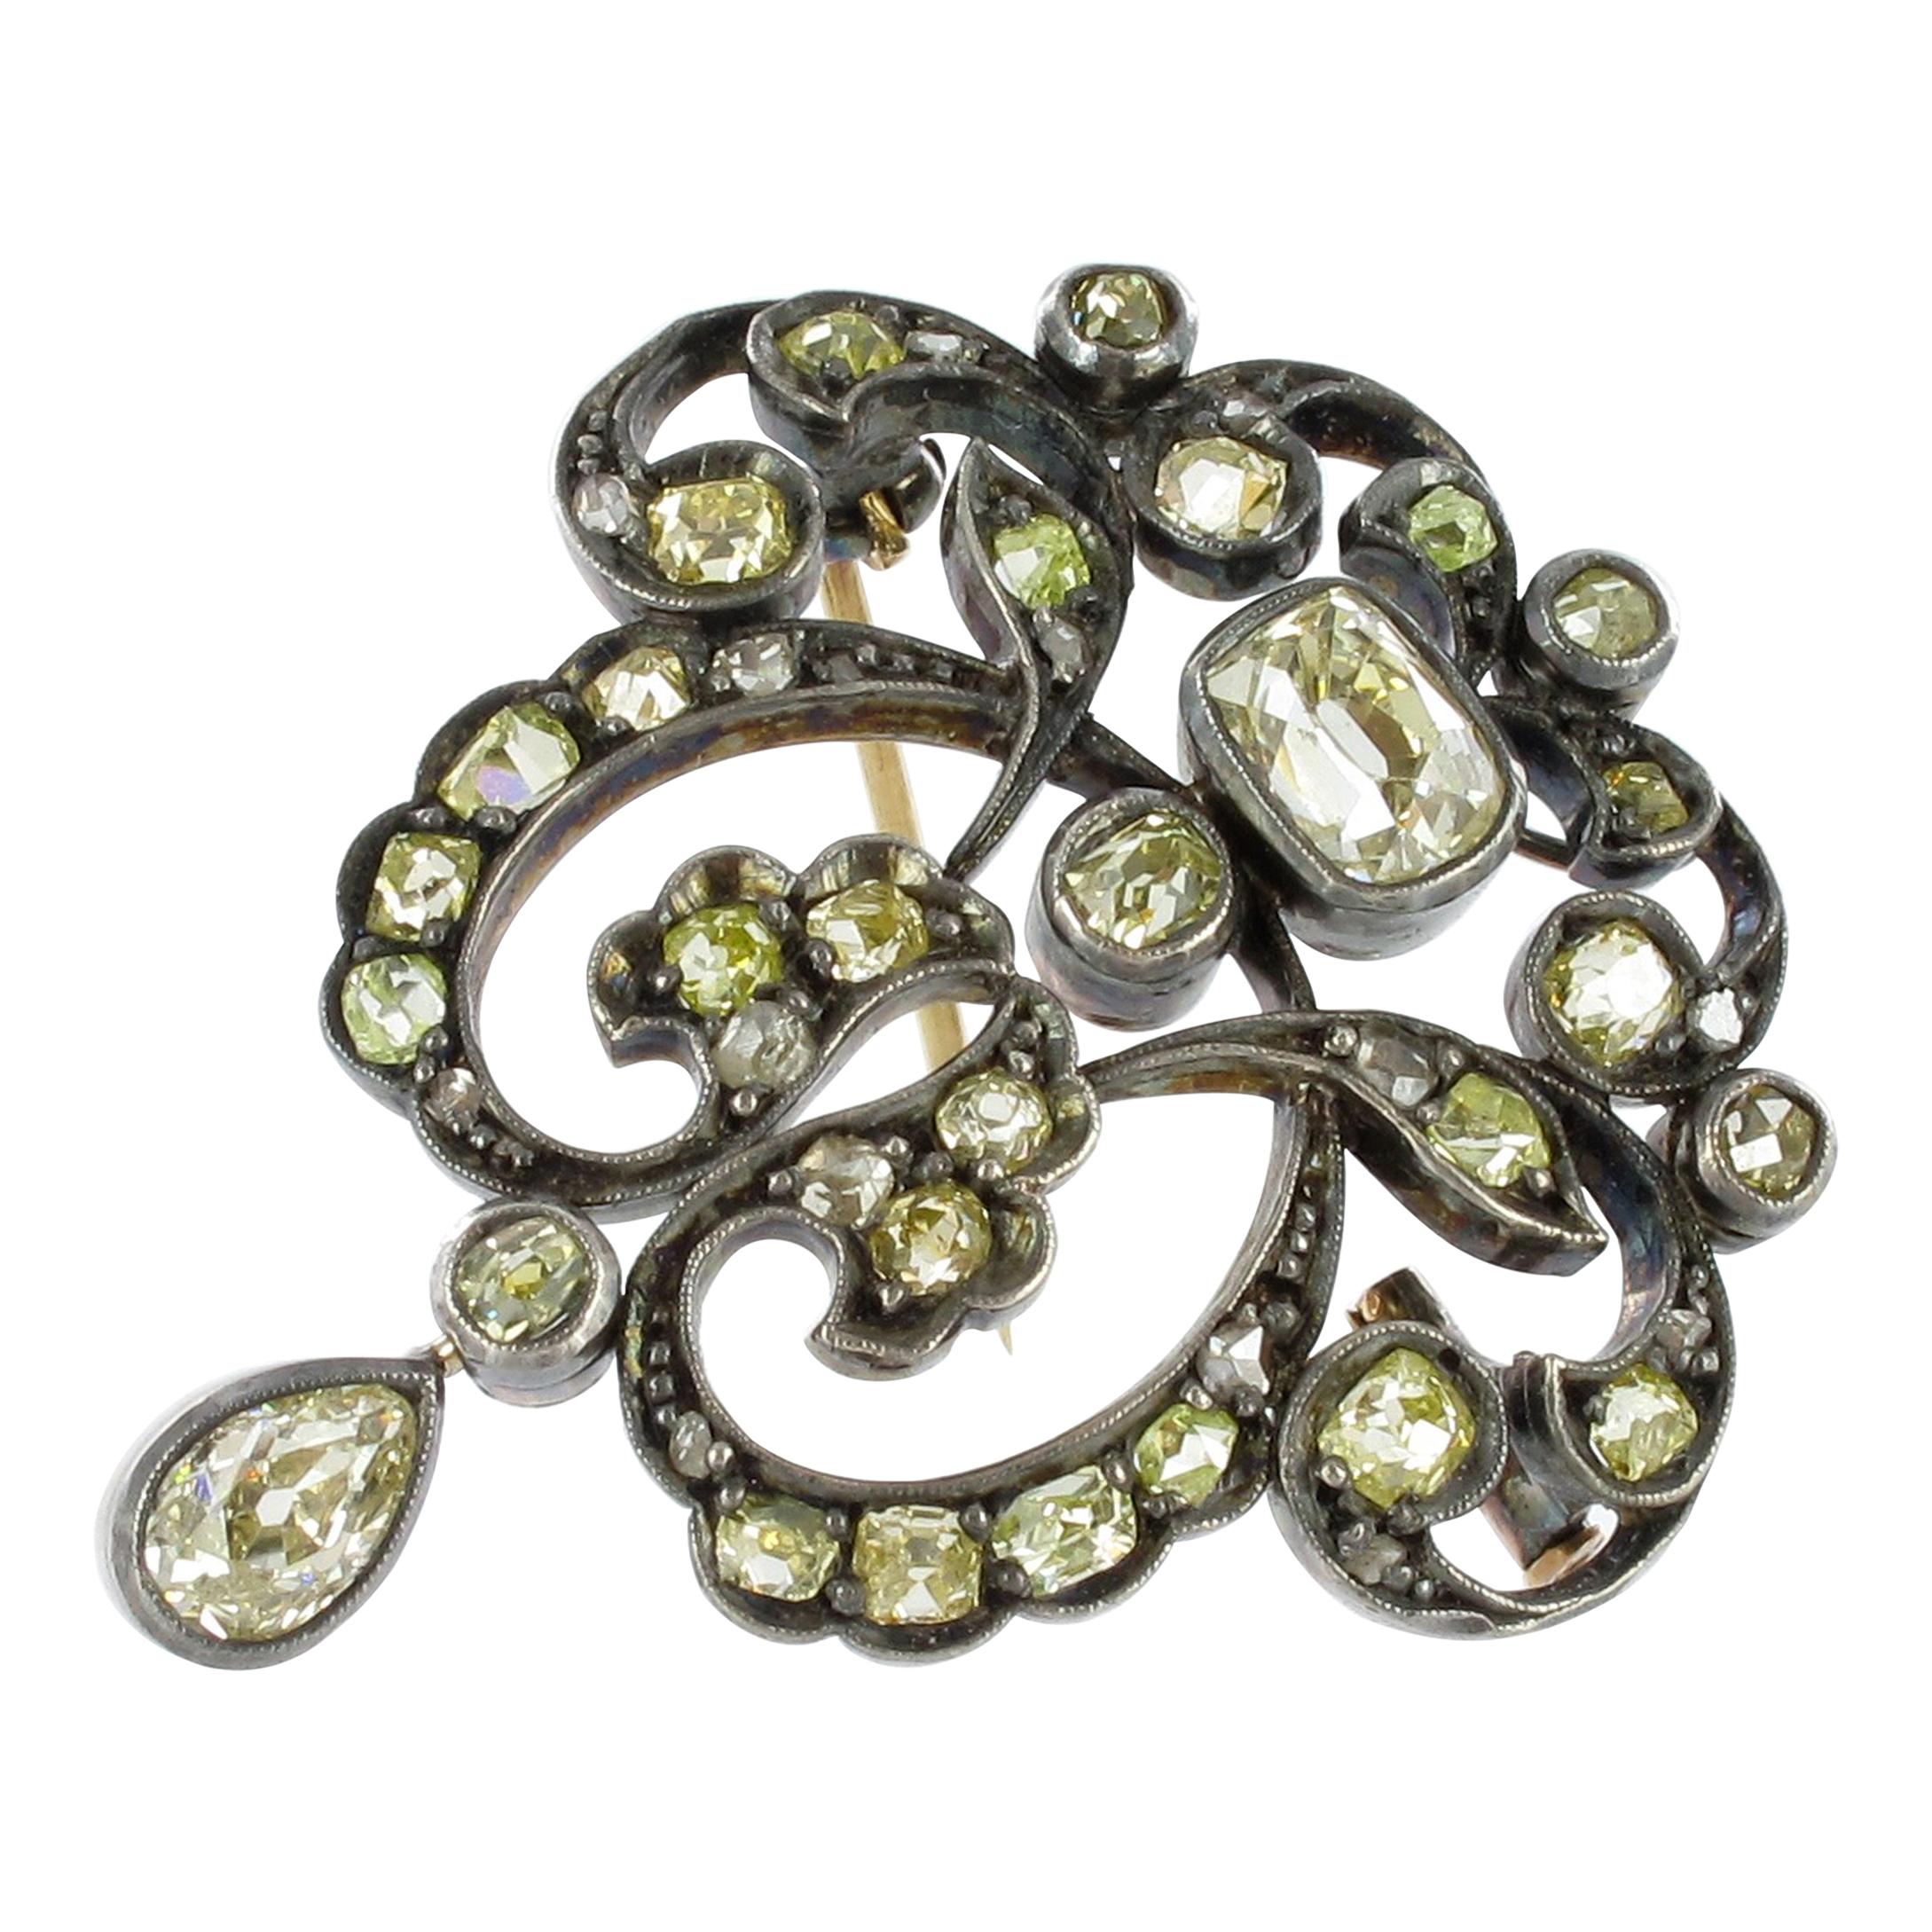 Victorian Pendant/Brooch with Old-Cut Diamonds in Silver and Gold